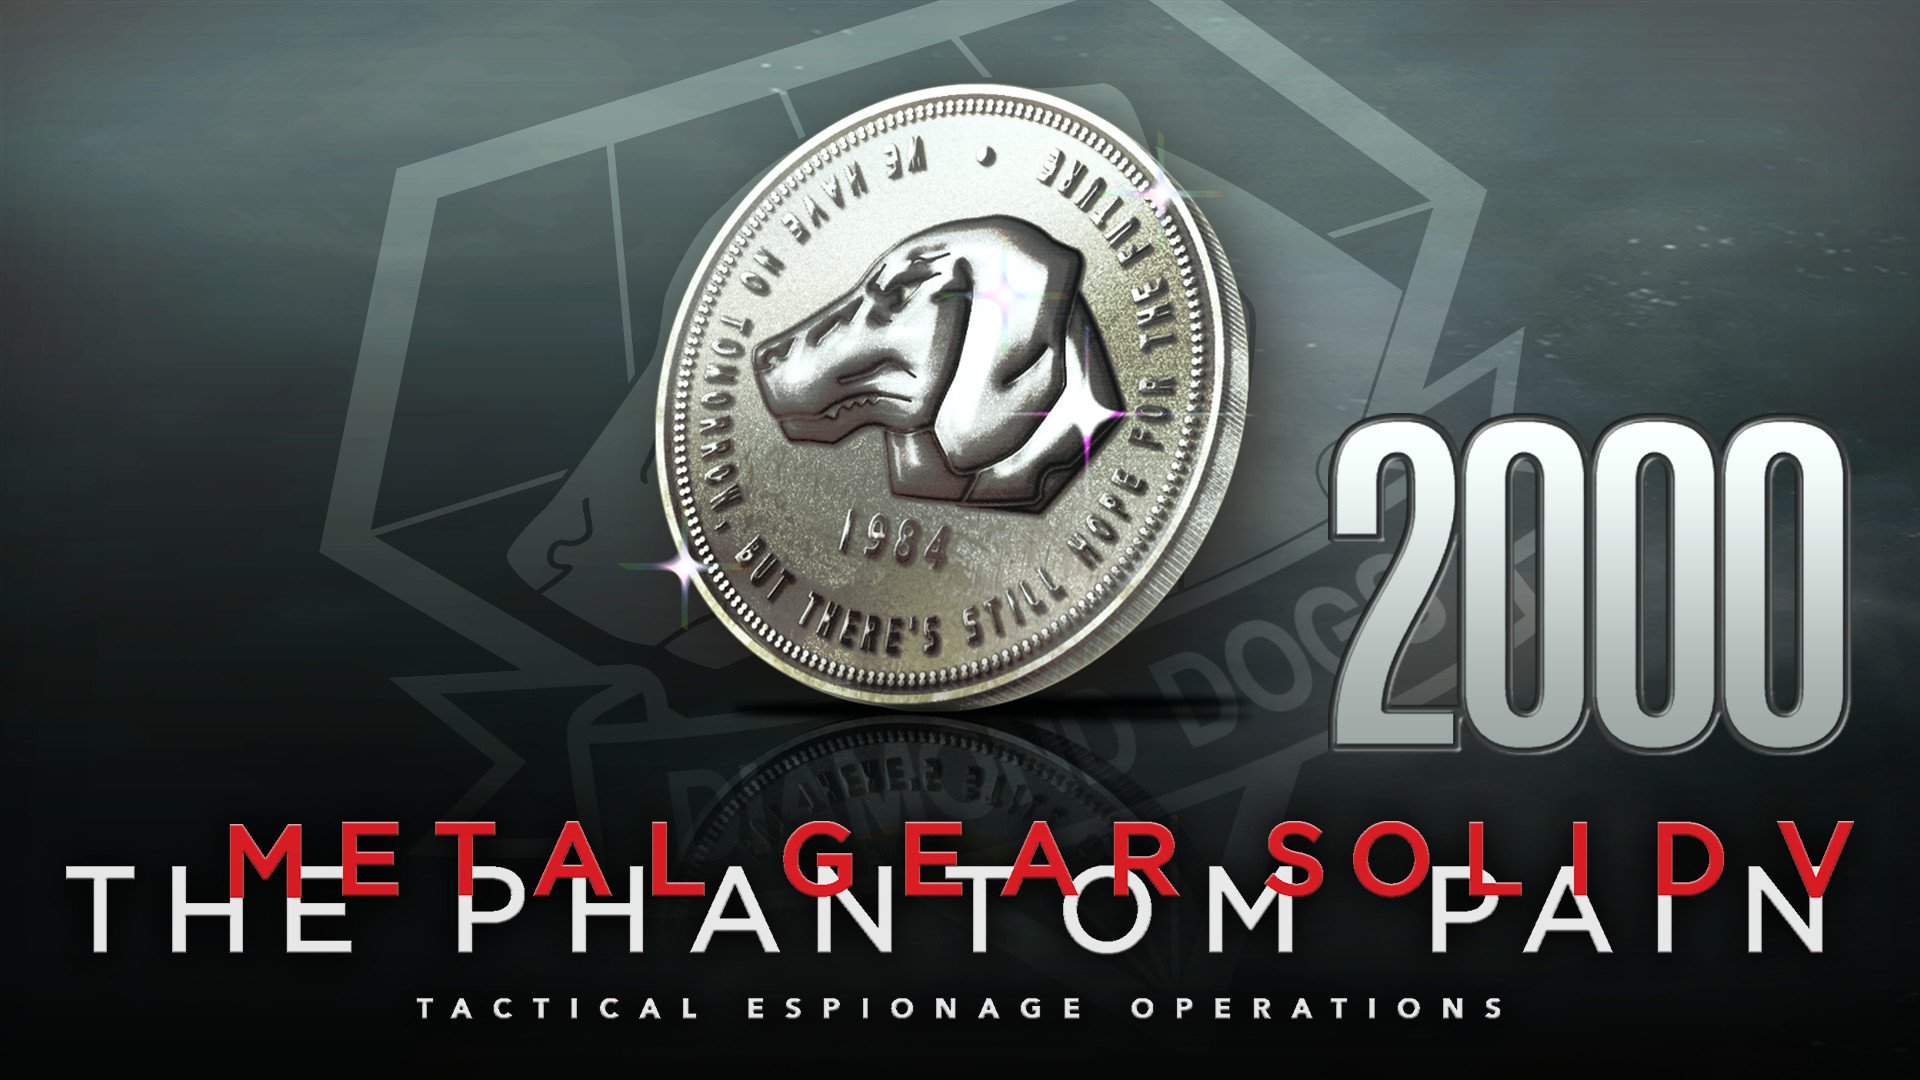 Metal Gear Solid V The Phantom Pain 2000 MB Coin LC 1